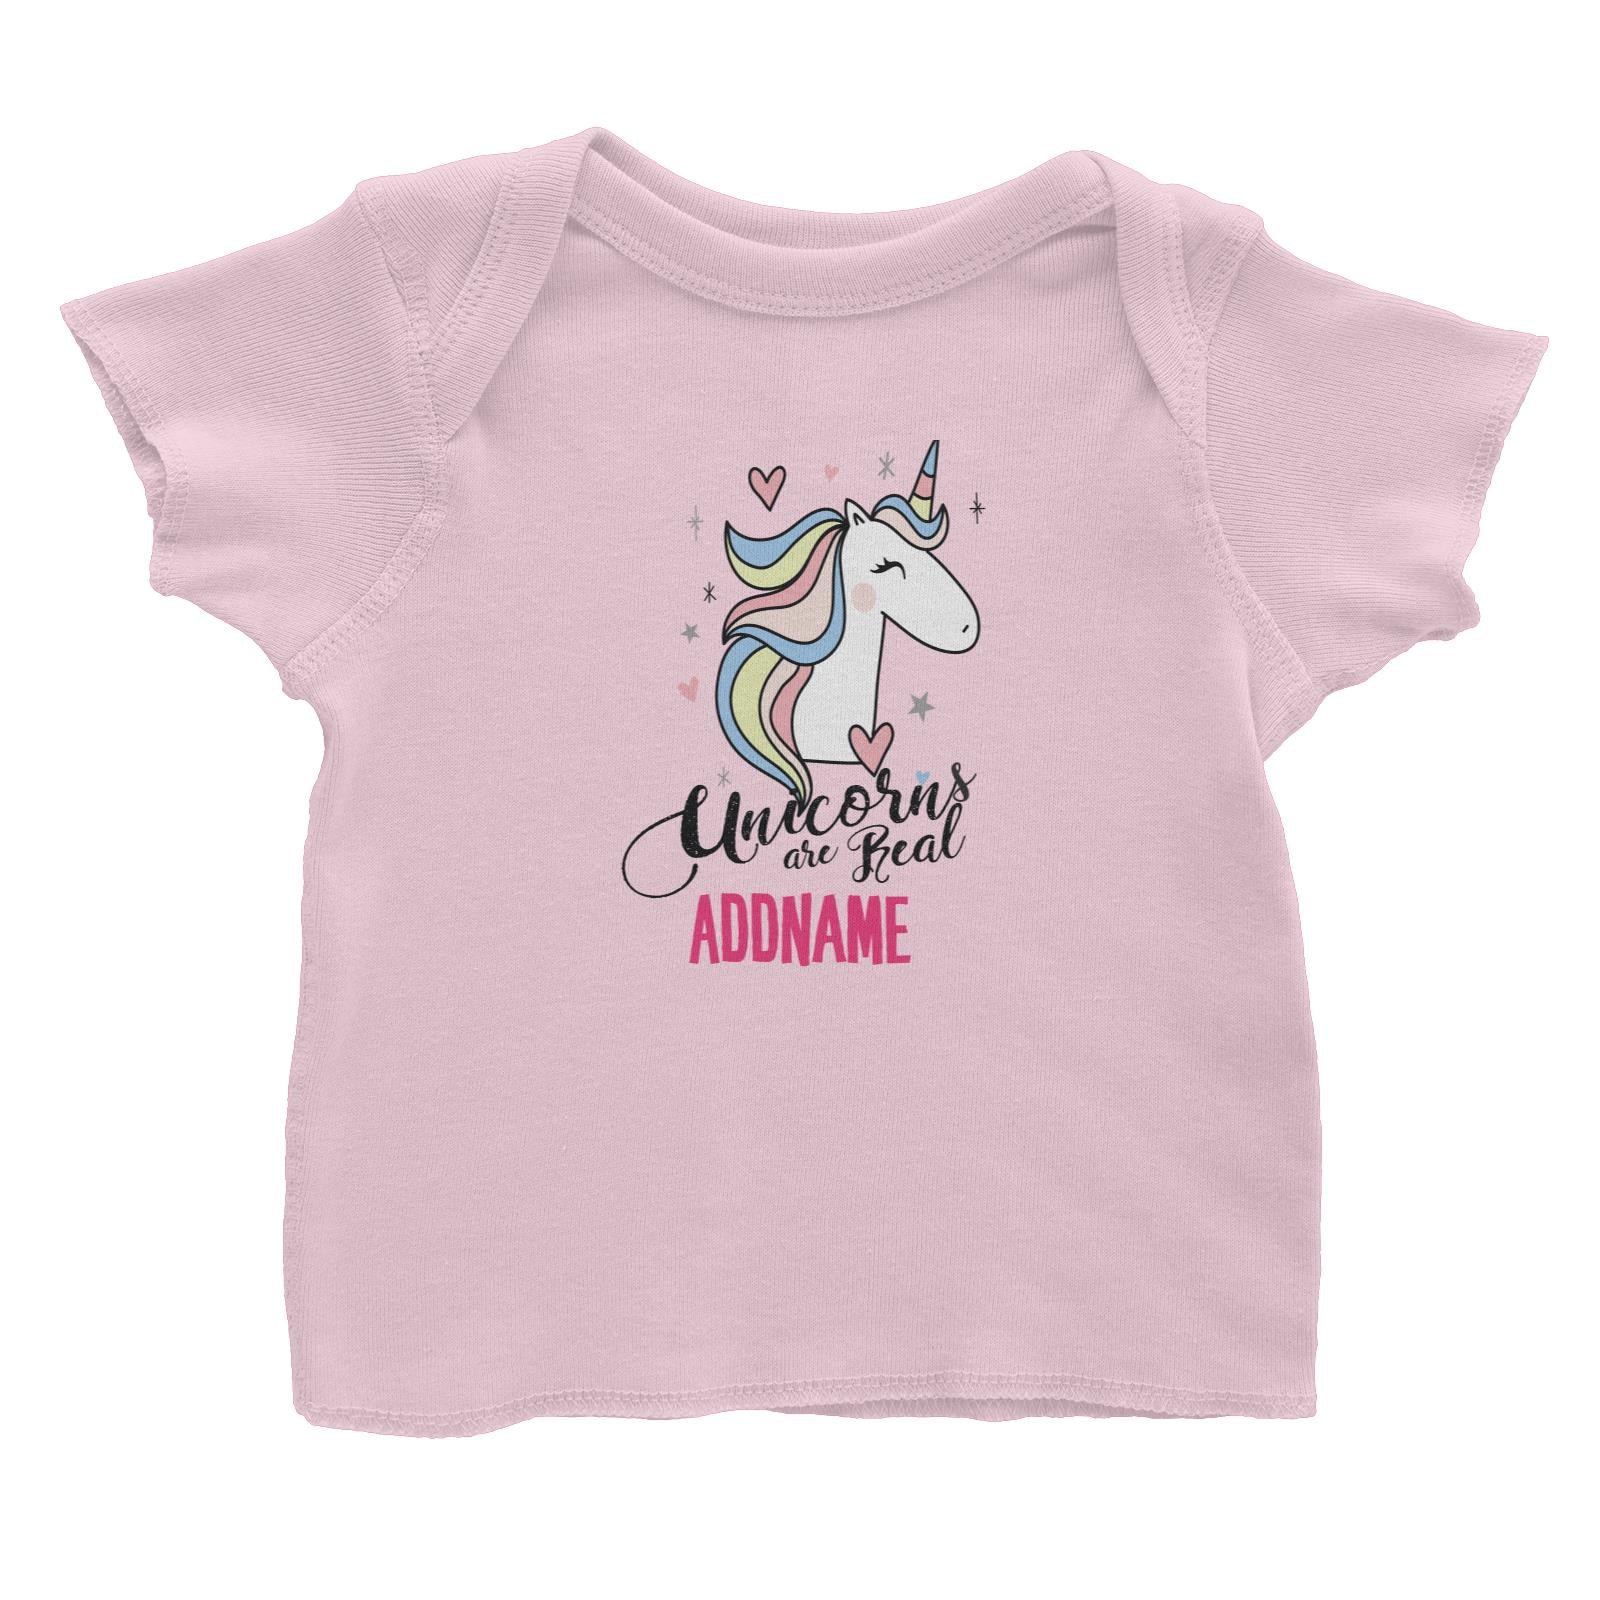 Cool Vibrant Series Unicorns Are Real Addname Baby T-Shirt